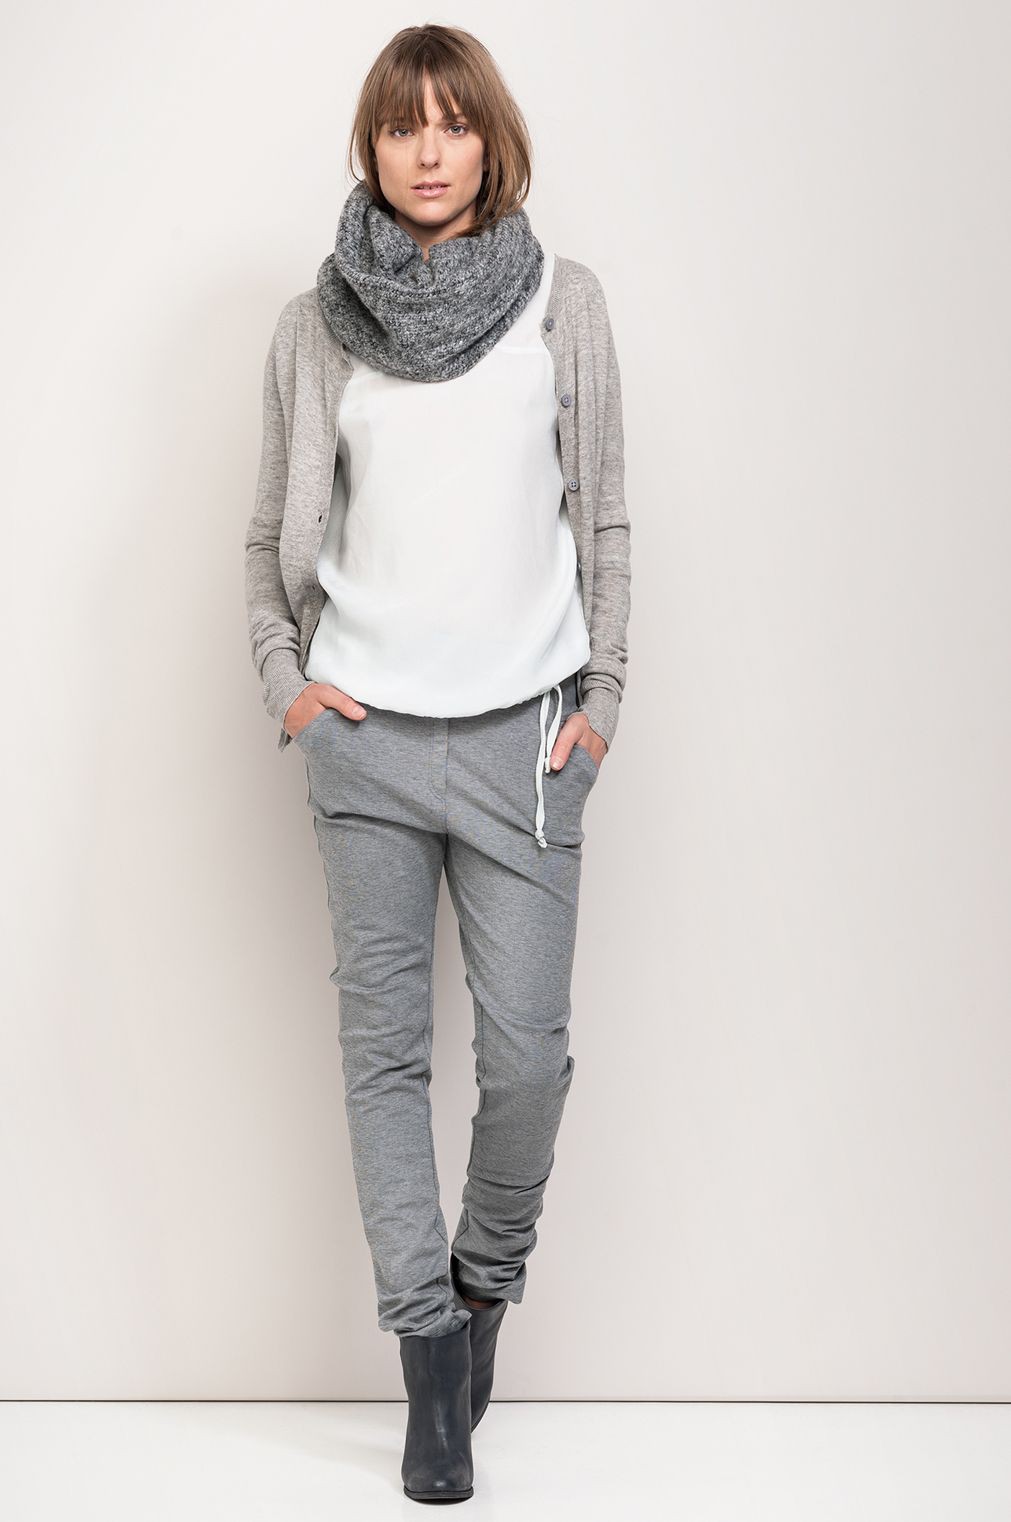 Grey sweatpants outfit winter | Joggers outfit for women | Casual wear,  Joggers Outfit, White Jacket